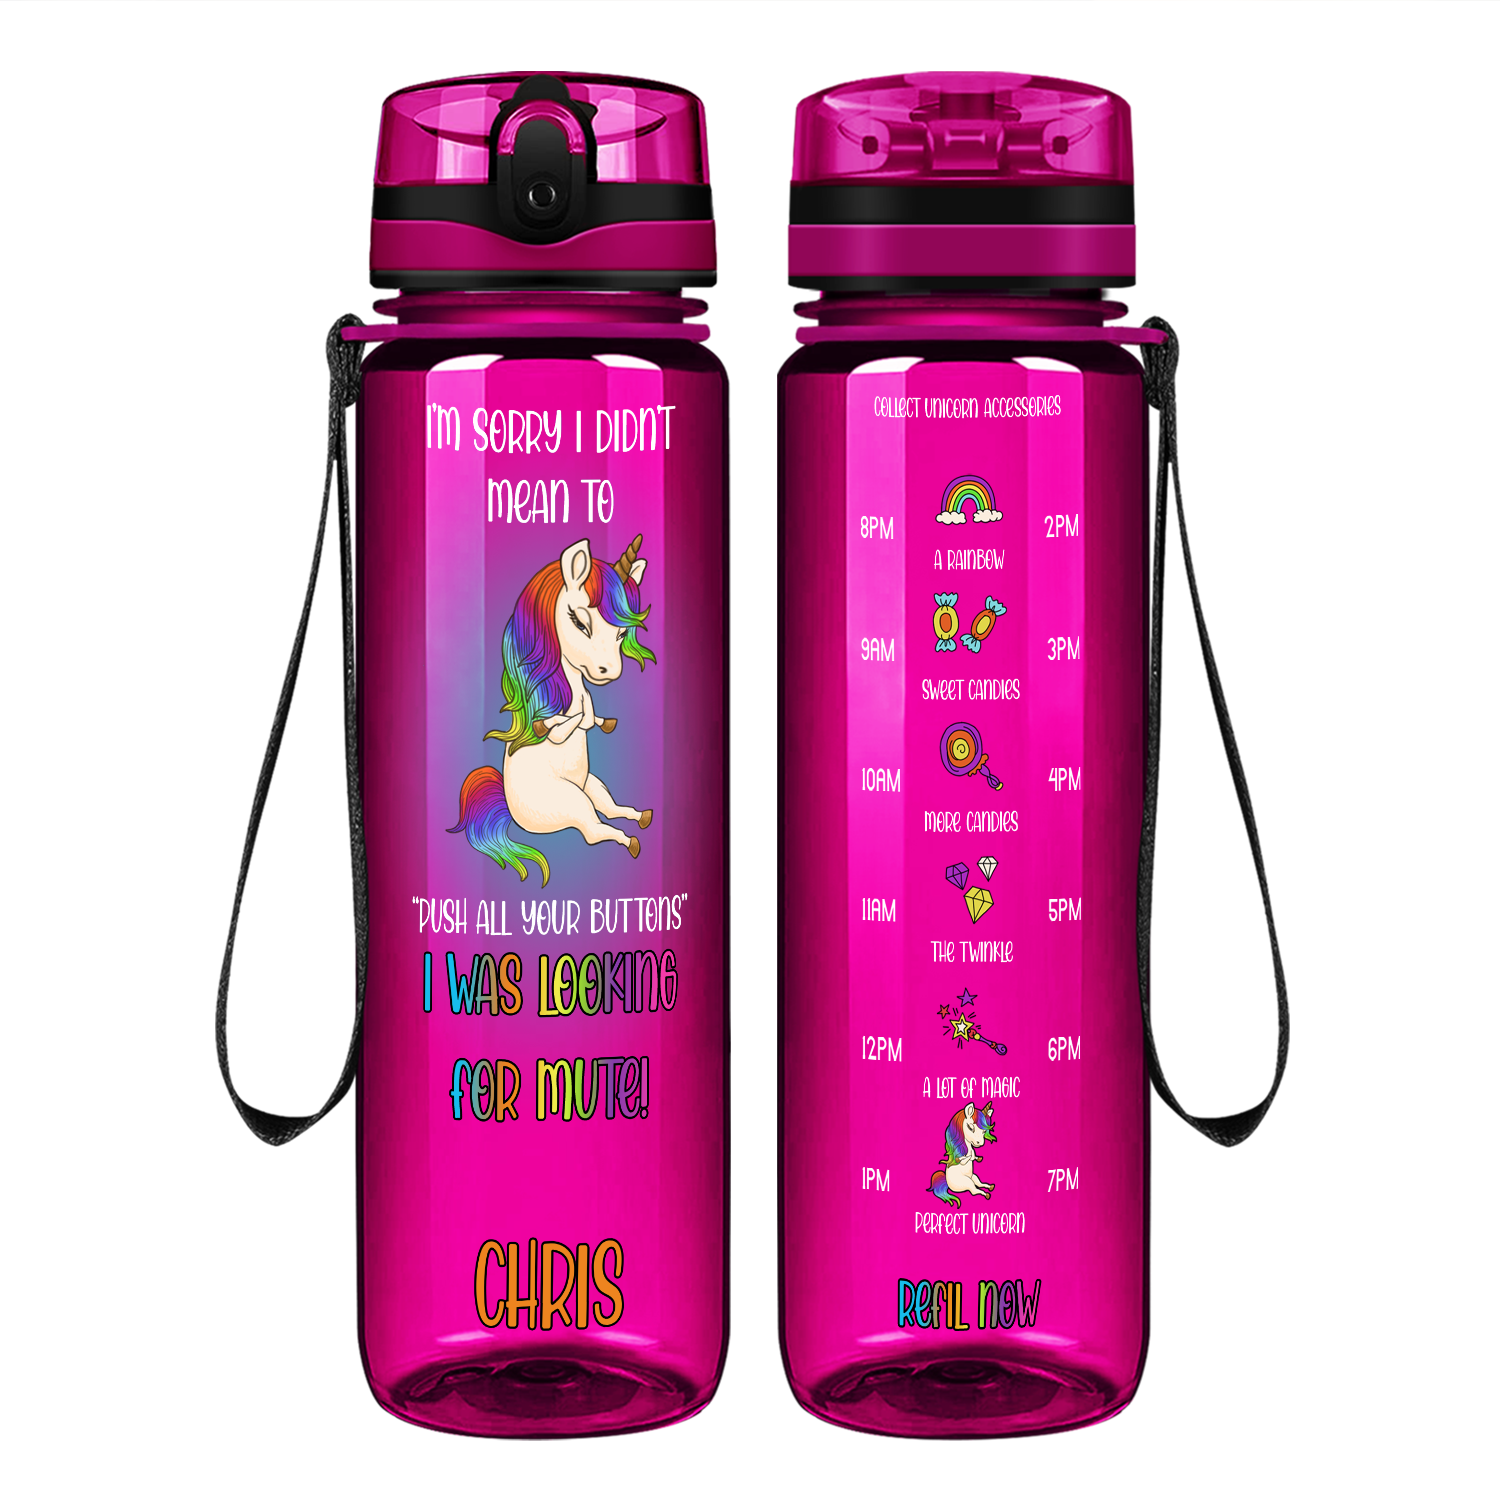 Funny Water Bottle, Stay Hydrated Bottle, Drink Your Effing Water, Maybe  Water Maybe Not, Mothers Day Gifts, Birthday Gift, Unicorn Bottle 